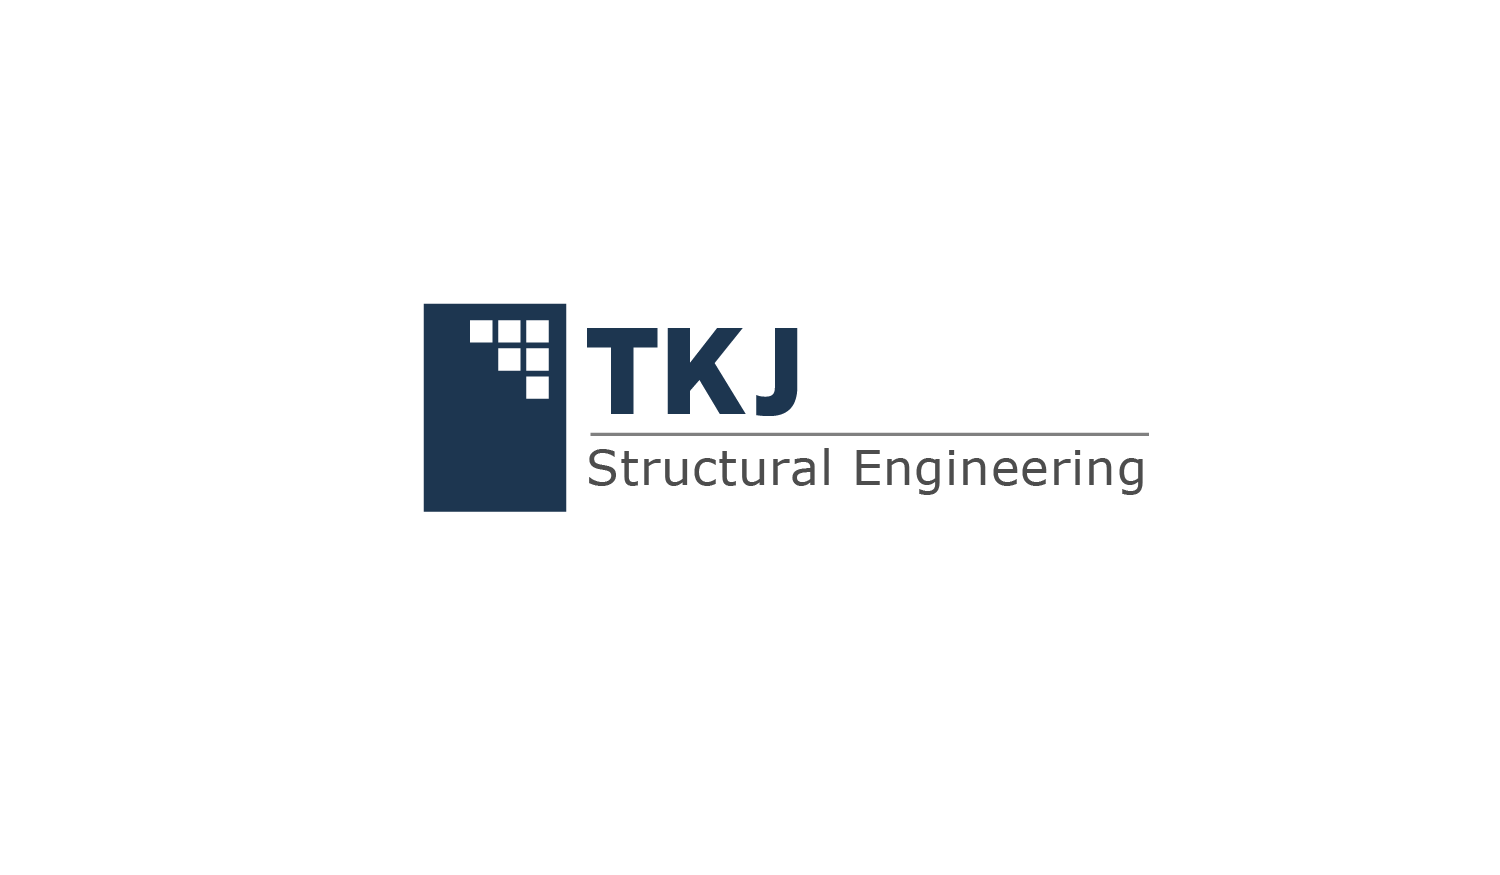 Professional Structural Engineer Logo - Professional, Serious, Civil Engineer Logo Design for TKJ Structural ...